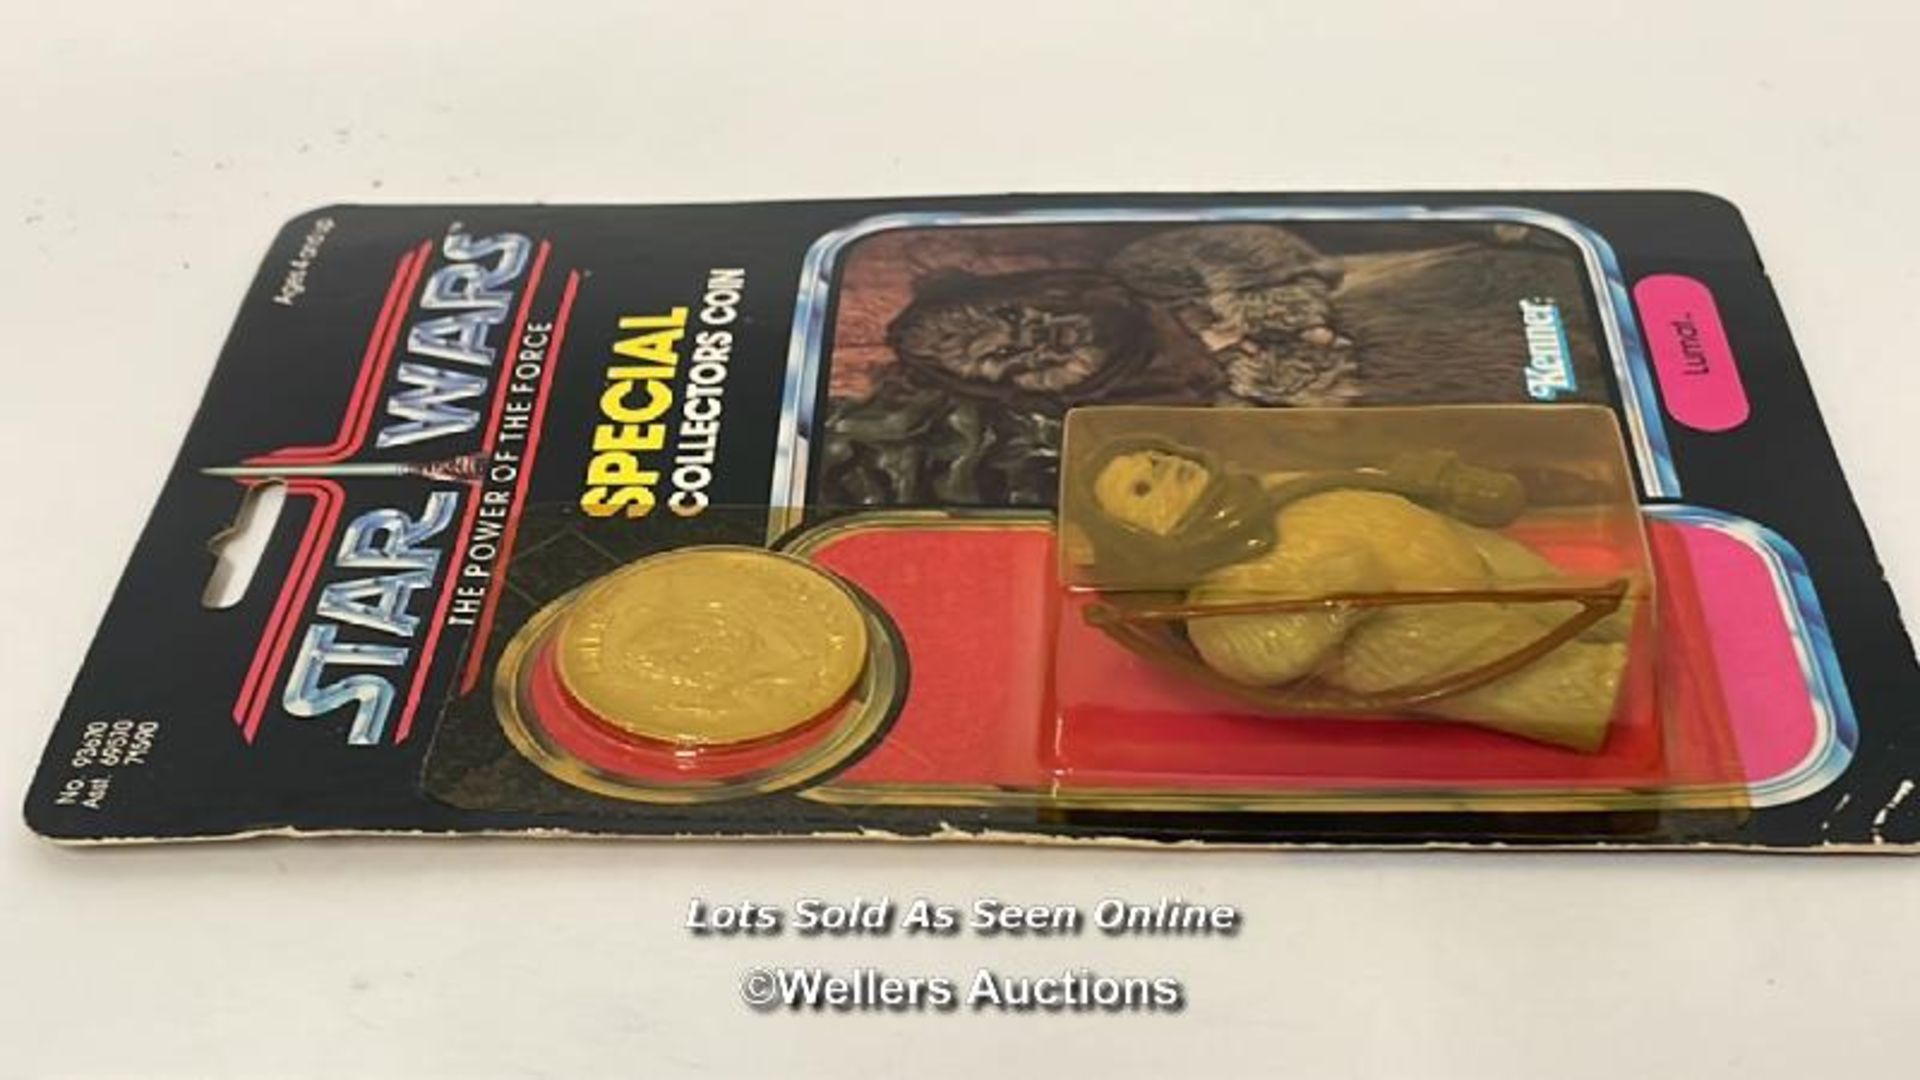 Star Wars vintage Lumat 3 3/4" figure, Power of the Force 92 back with collectors coin, Kenner 1984, - Image 5 of 11